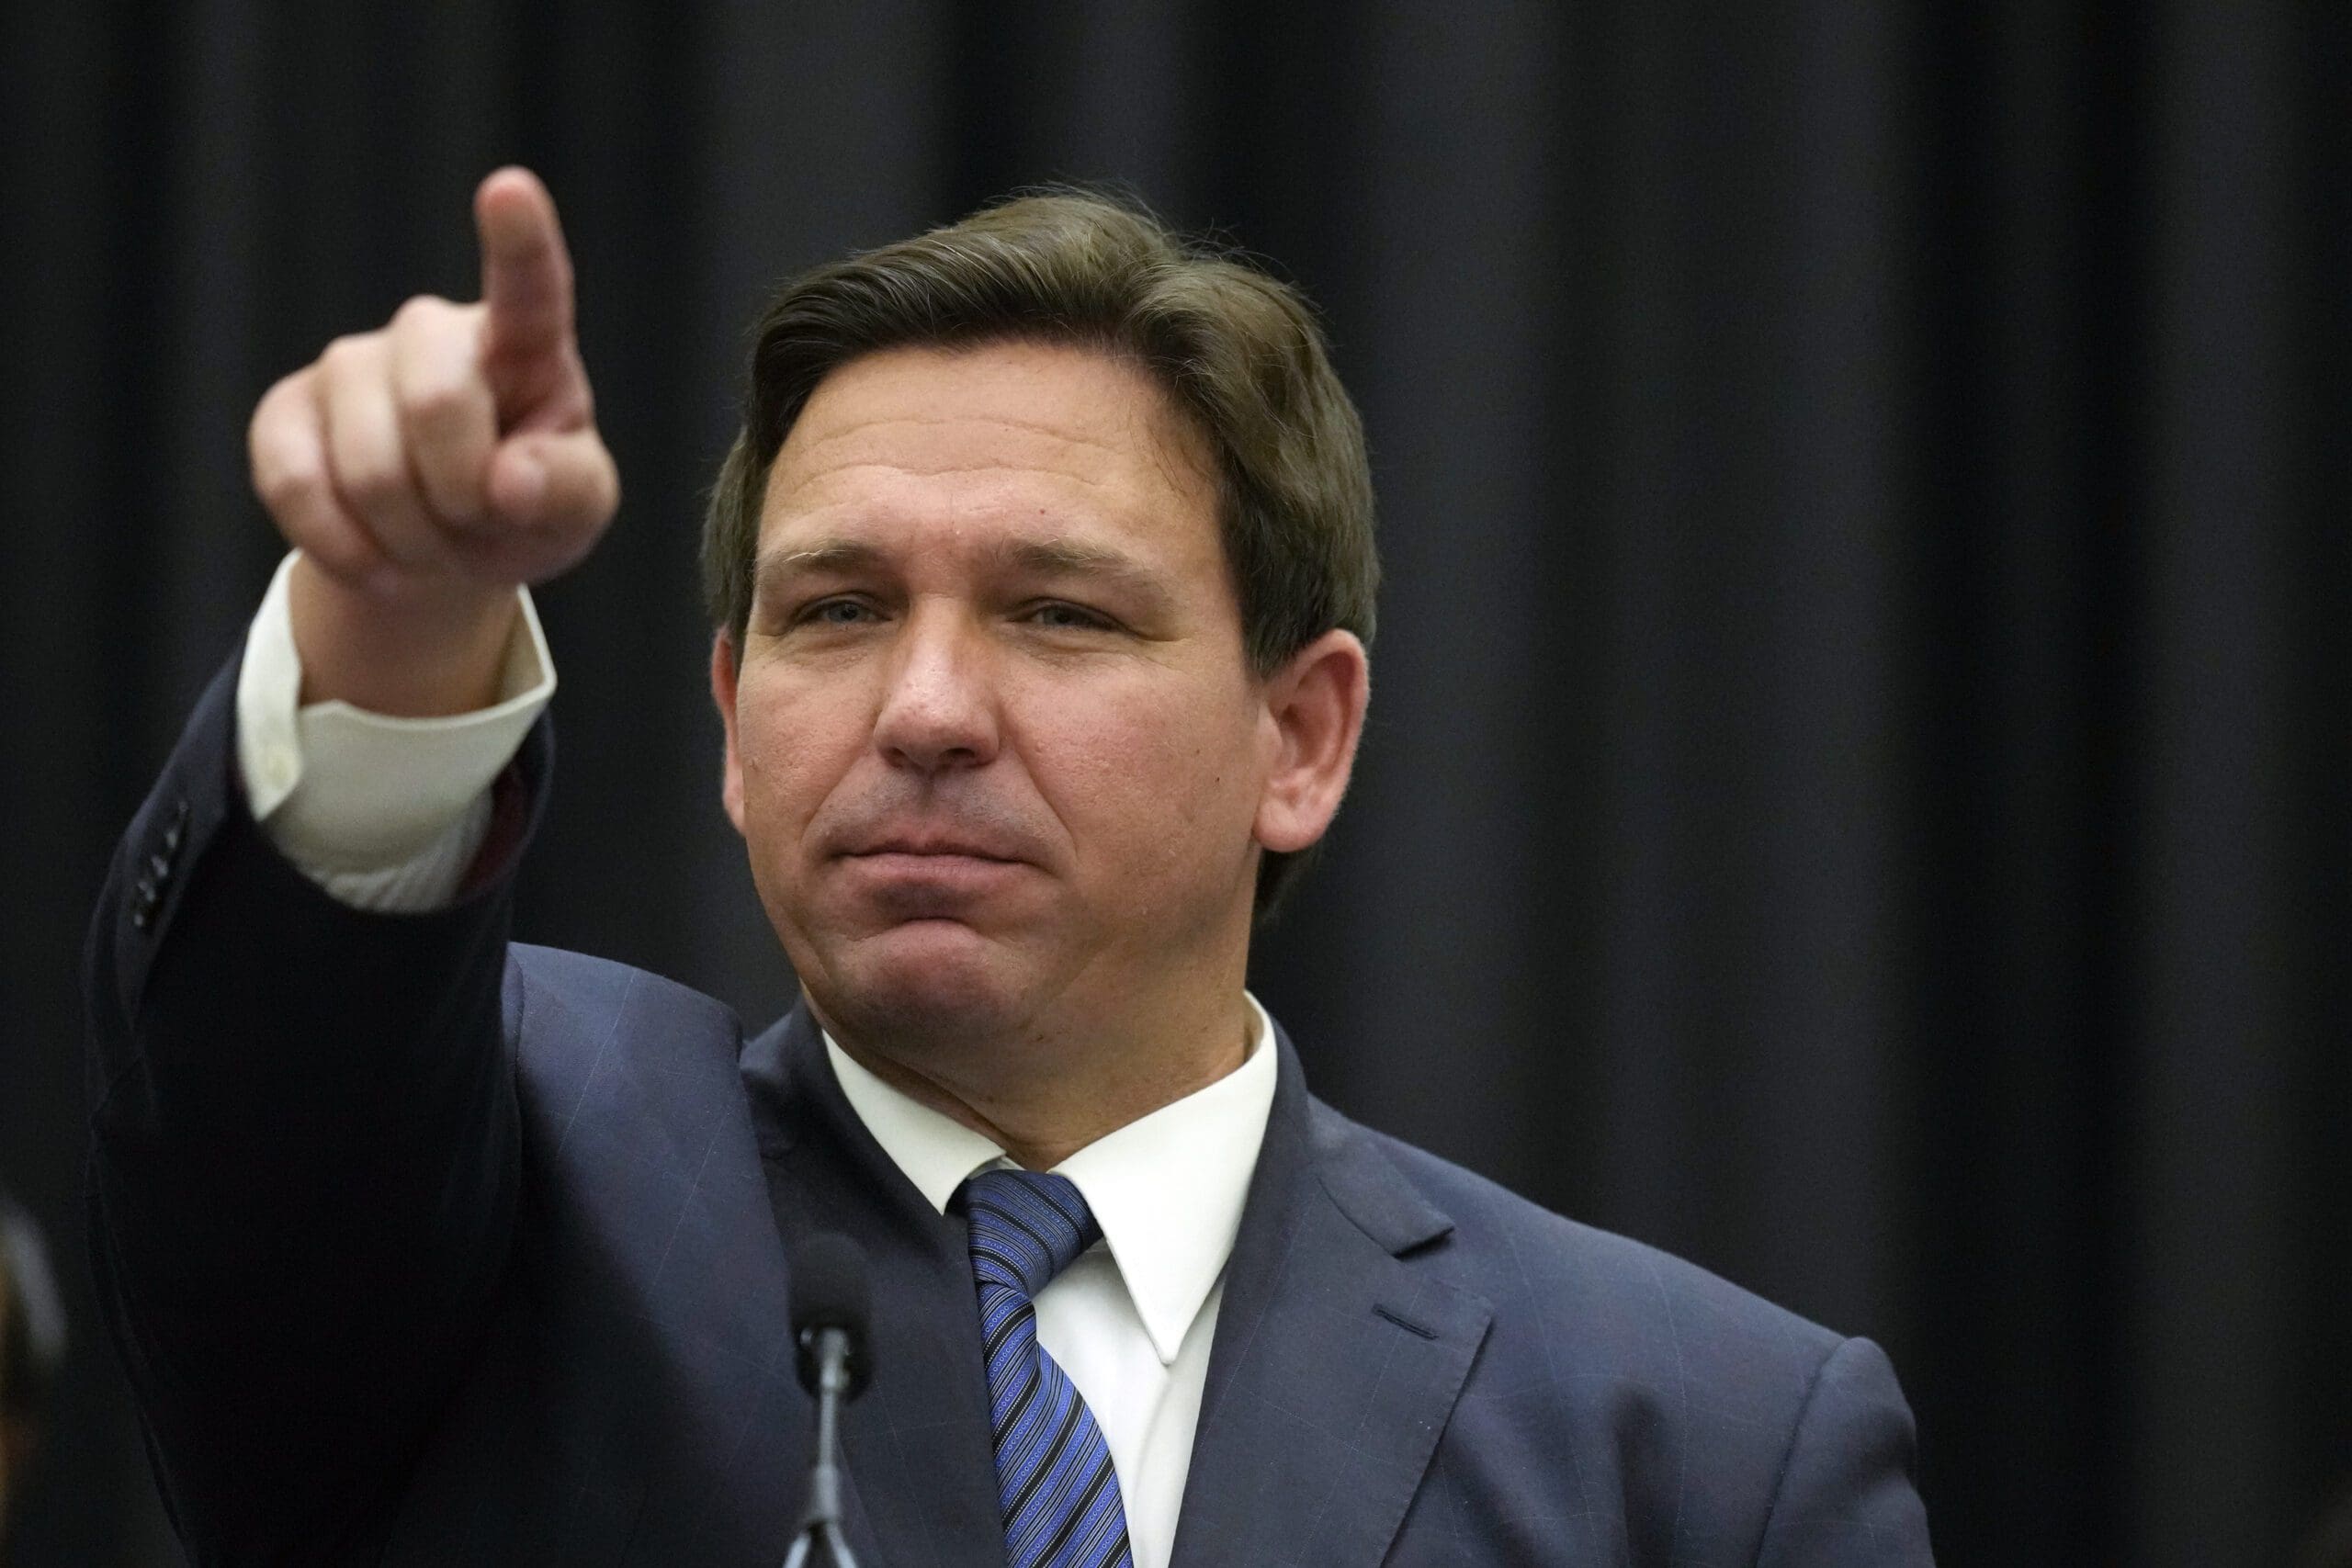 desantis-defends-early-hurricane-response-as-questions-mount-over-evacuations